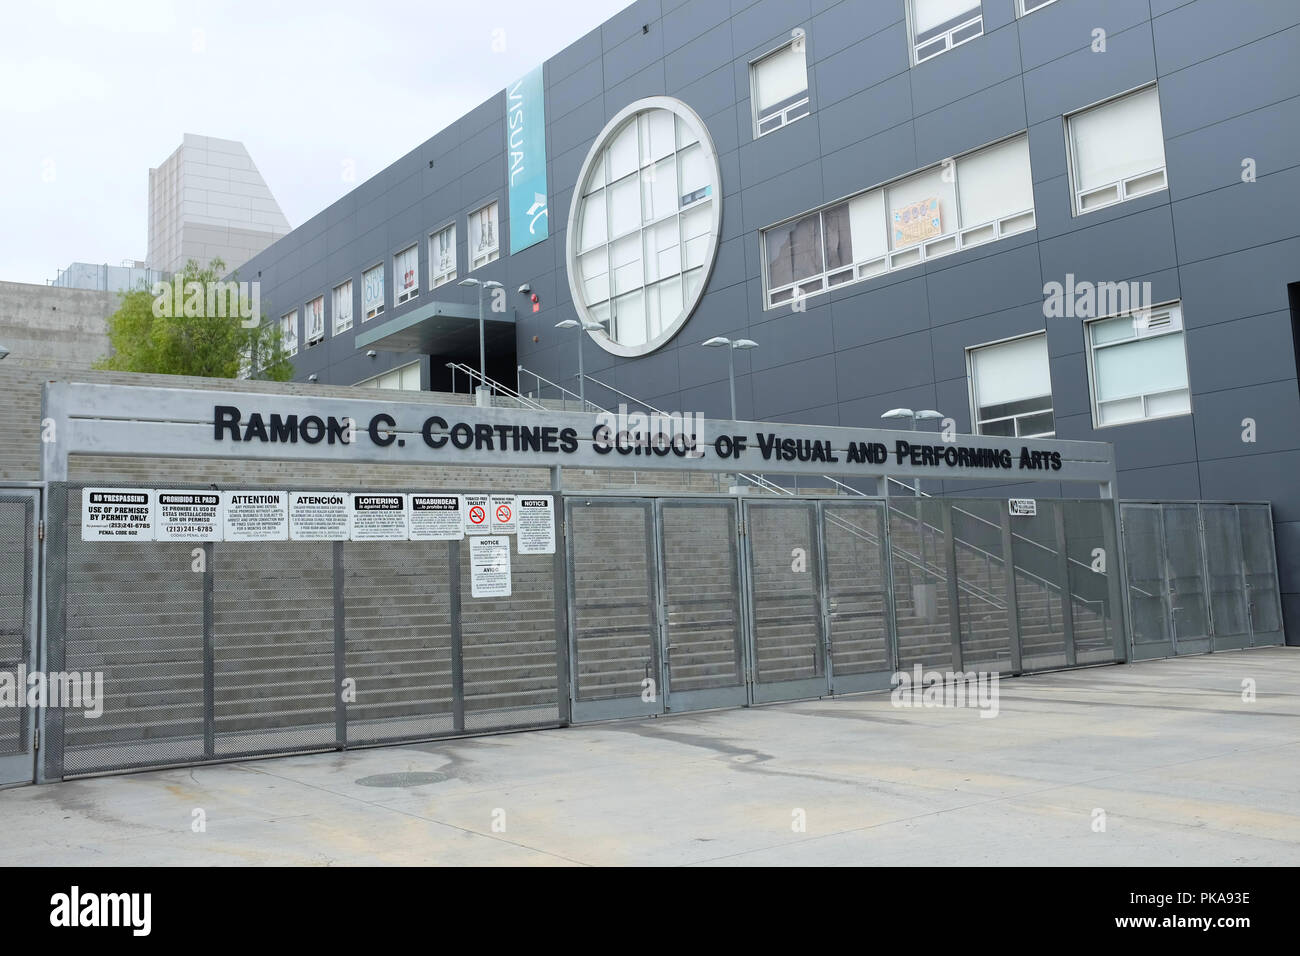 LOS ANGELES - SEPT 2, 2018: The Ramon C. Cortines School of Visual and Performing Arts is a magnet, public high school in the Los Angeles Unified Scho Stock Photo